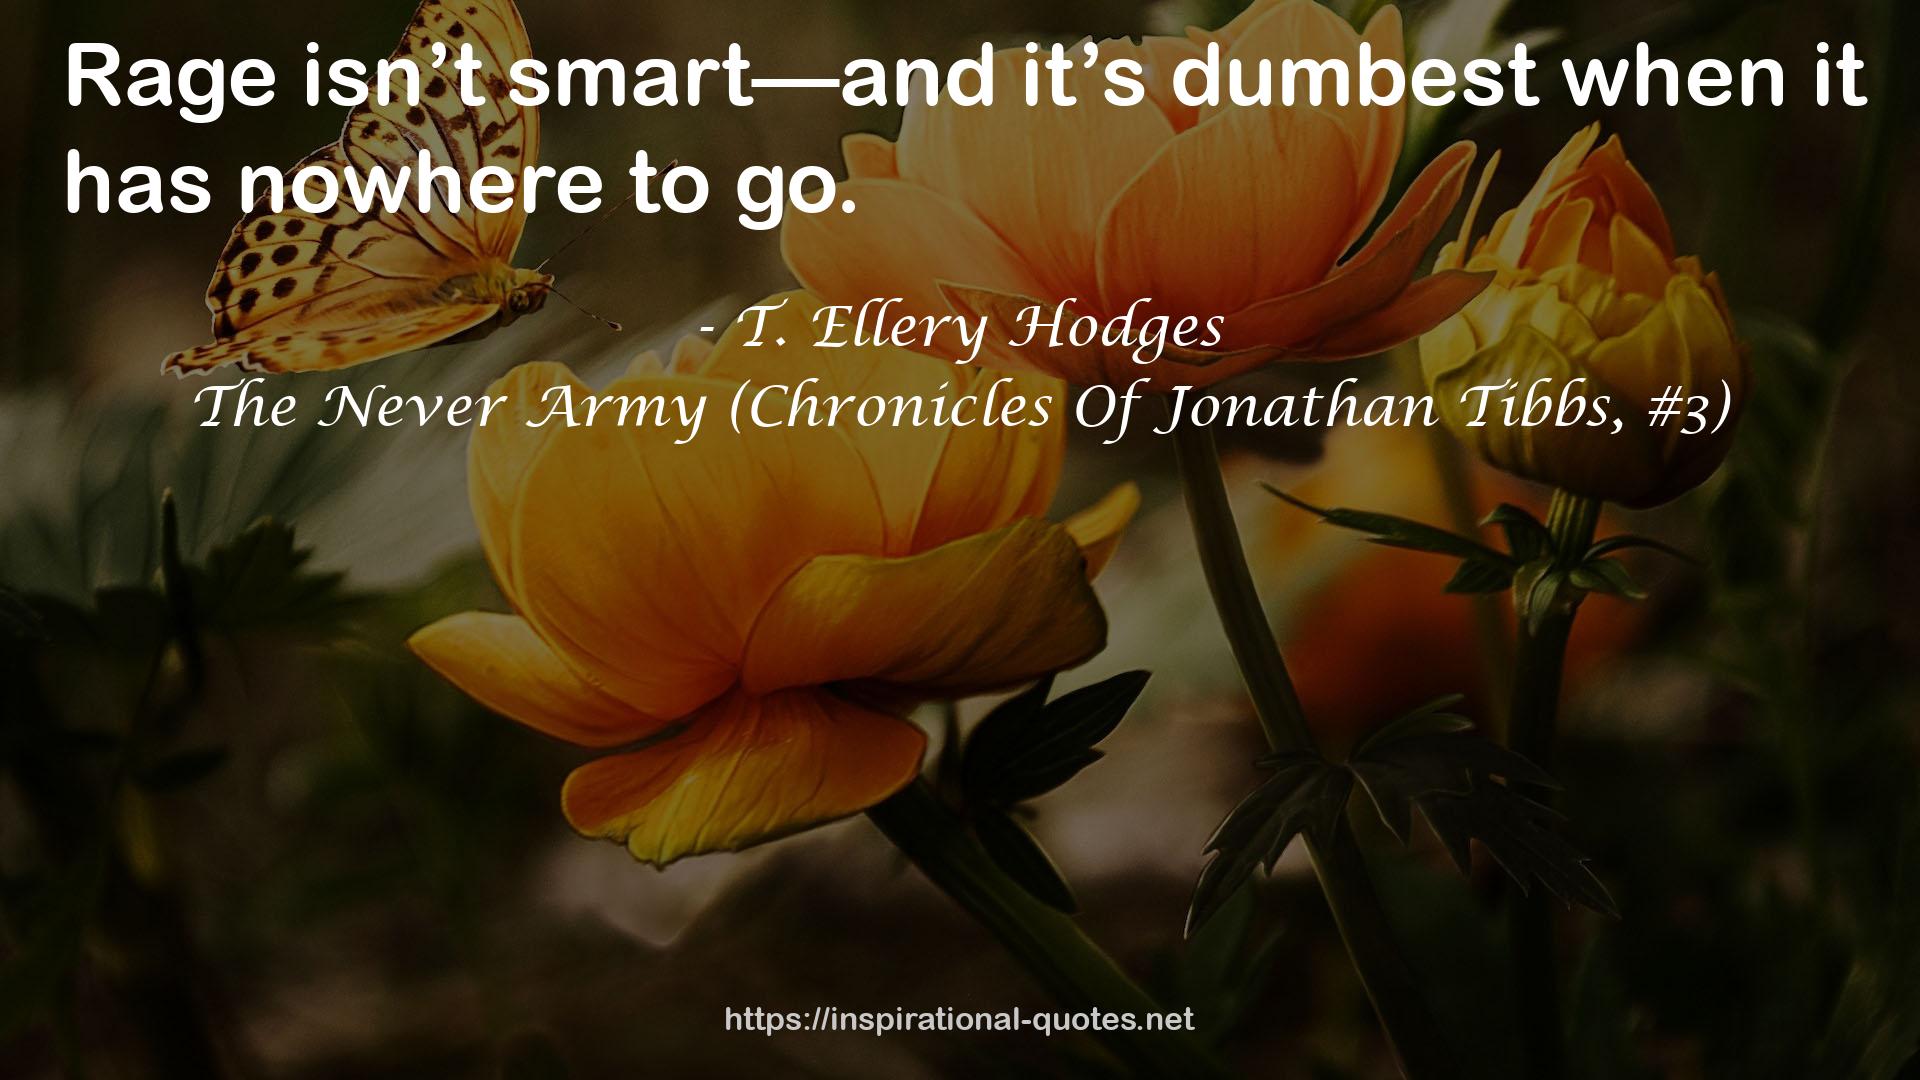 The Never Army (Chronicles Of Jonathan Tibbs, #3) QUOTES